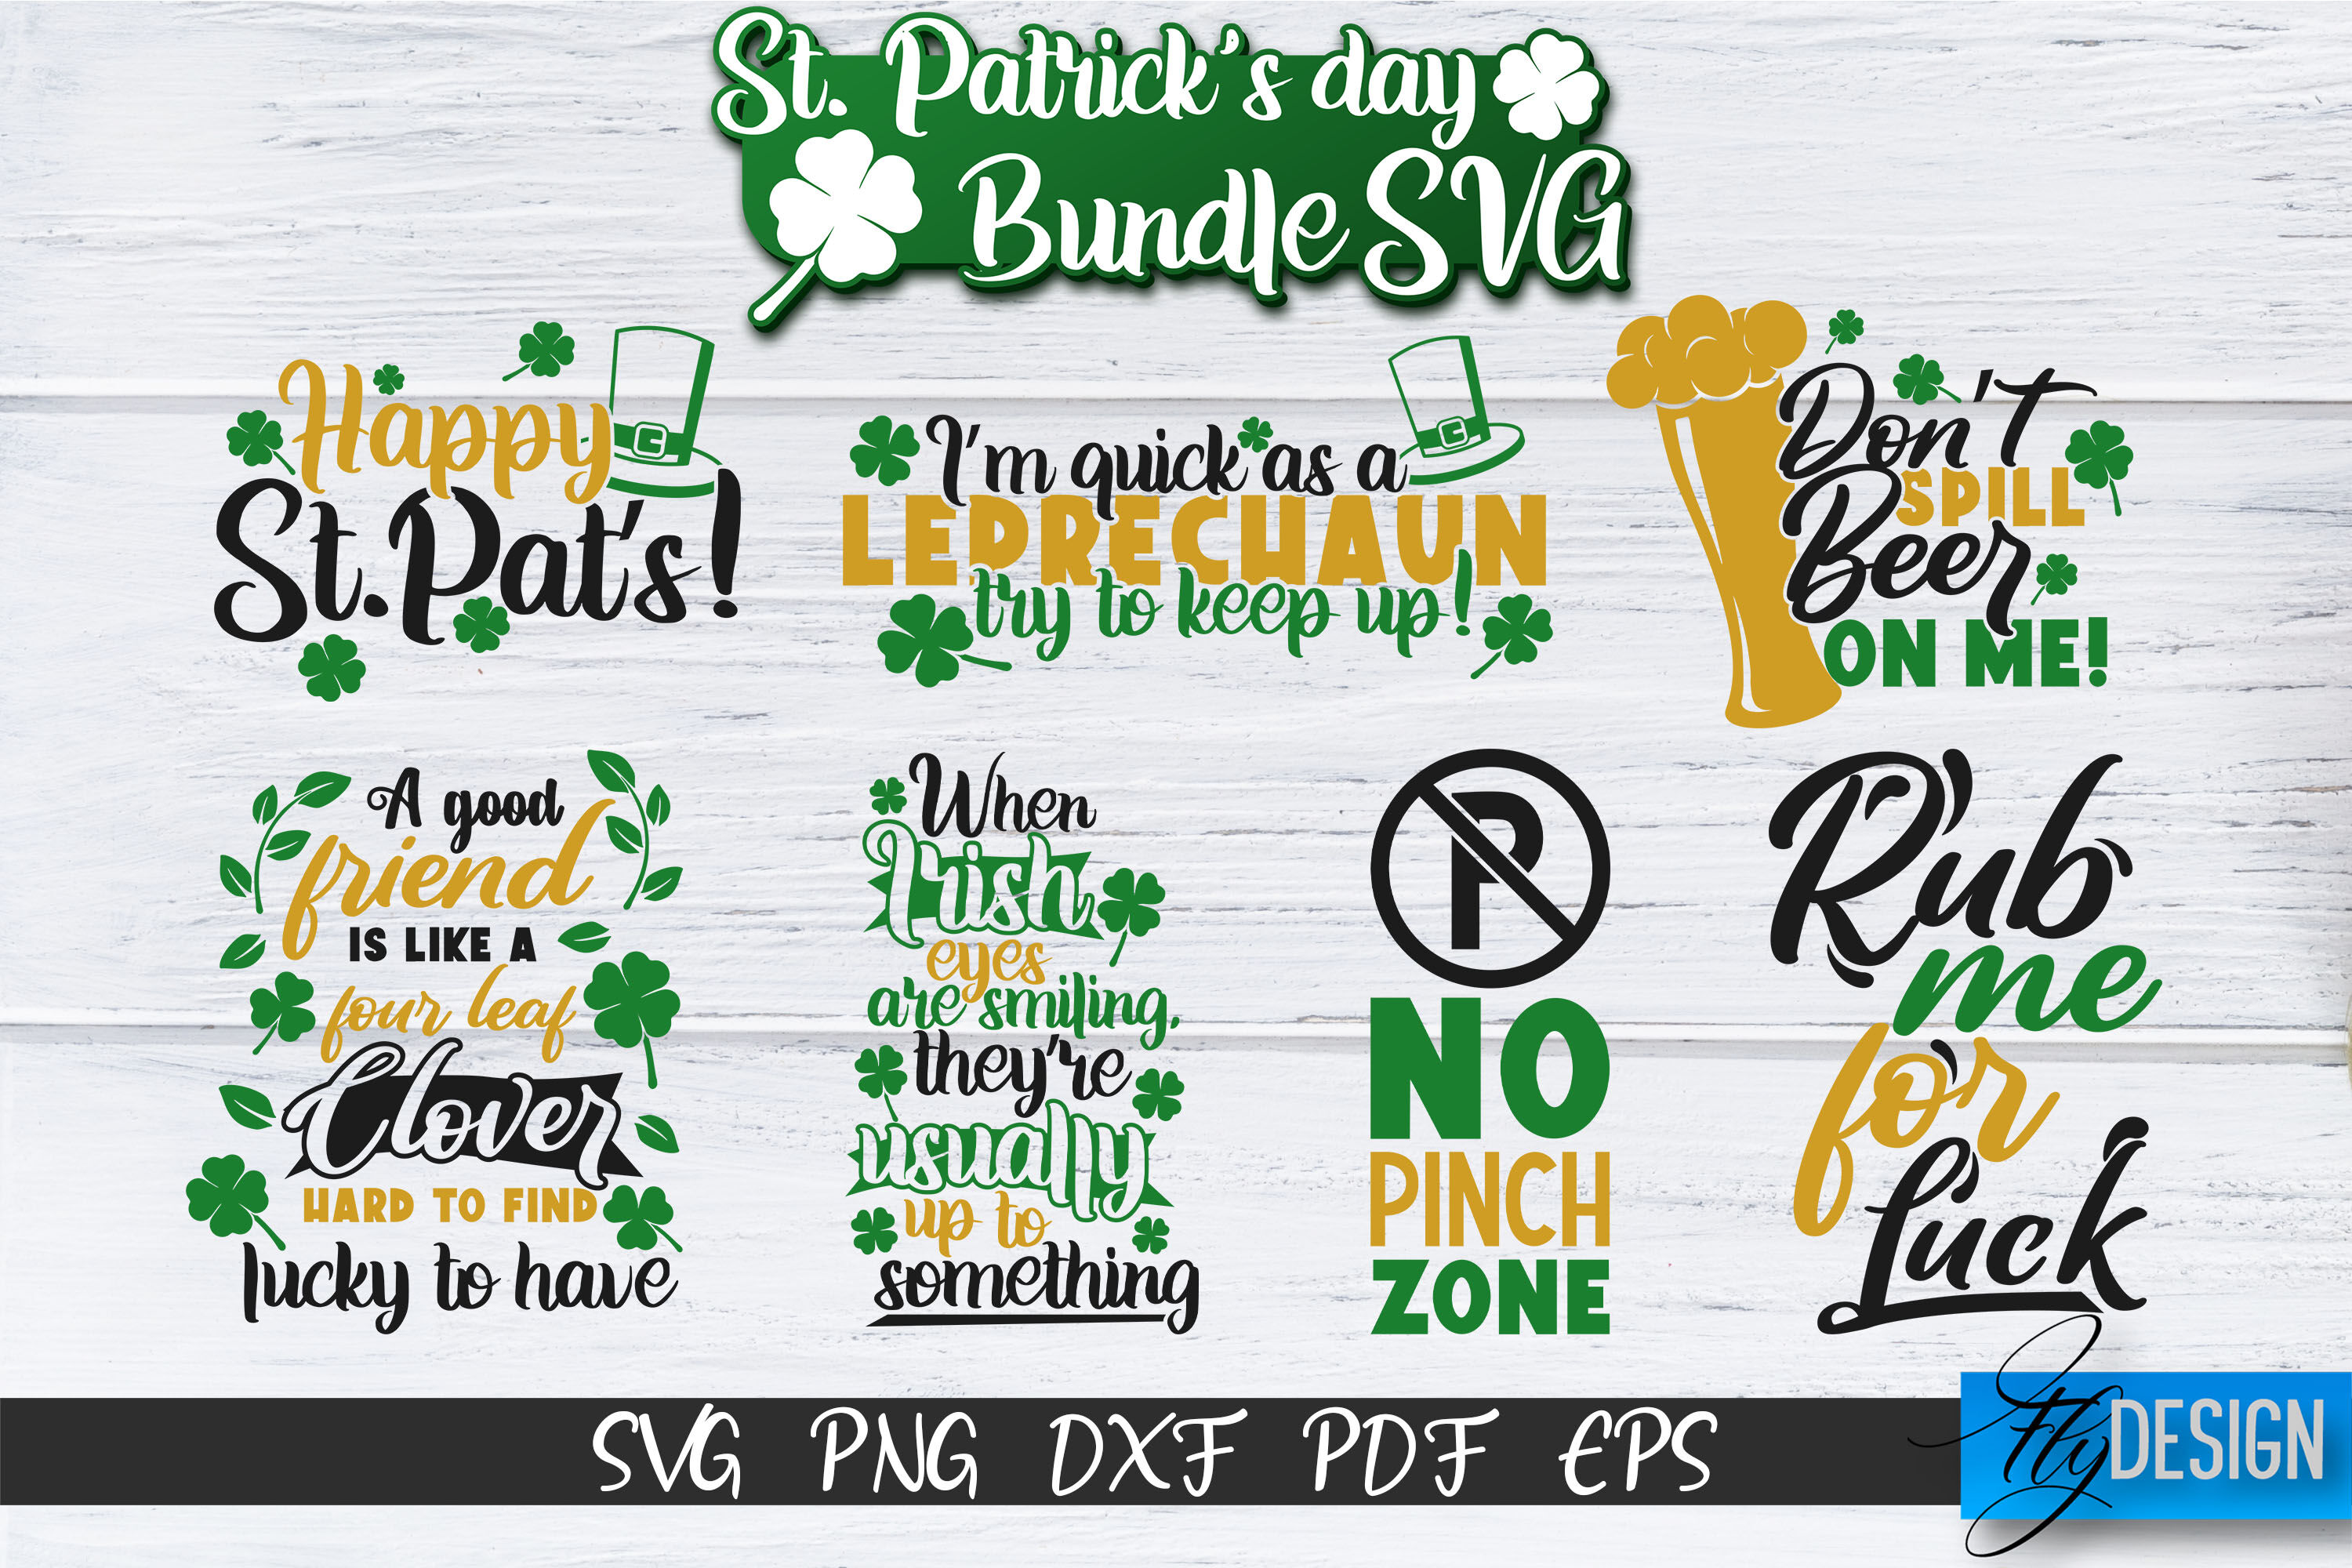 No Pinch Zone Sign Printables Free Download - St Patrick's Day